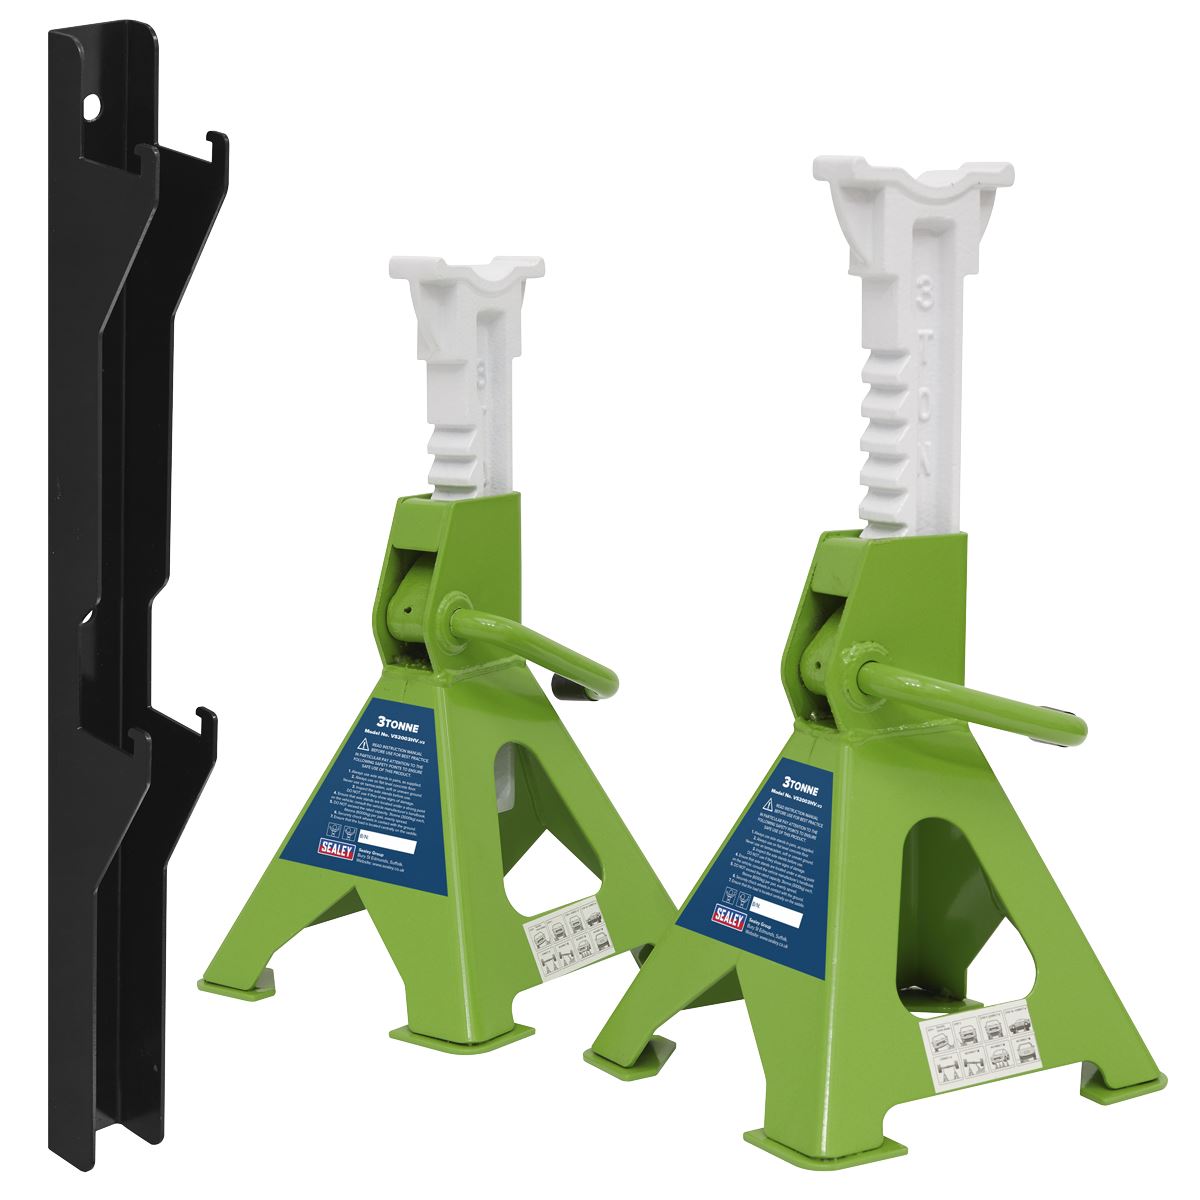 Sealey Axle Stand & Axle Stand Storage Rack Combo 3 Tonne - Hi-Vis Green